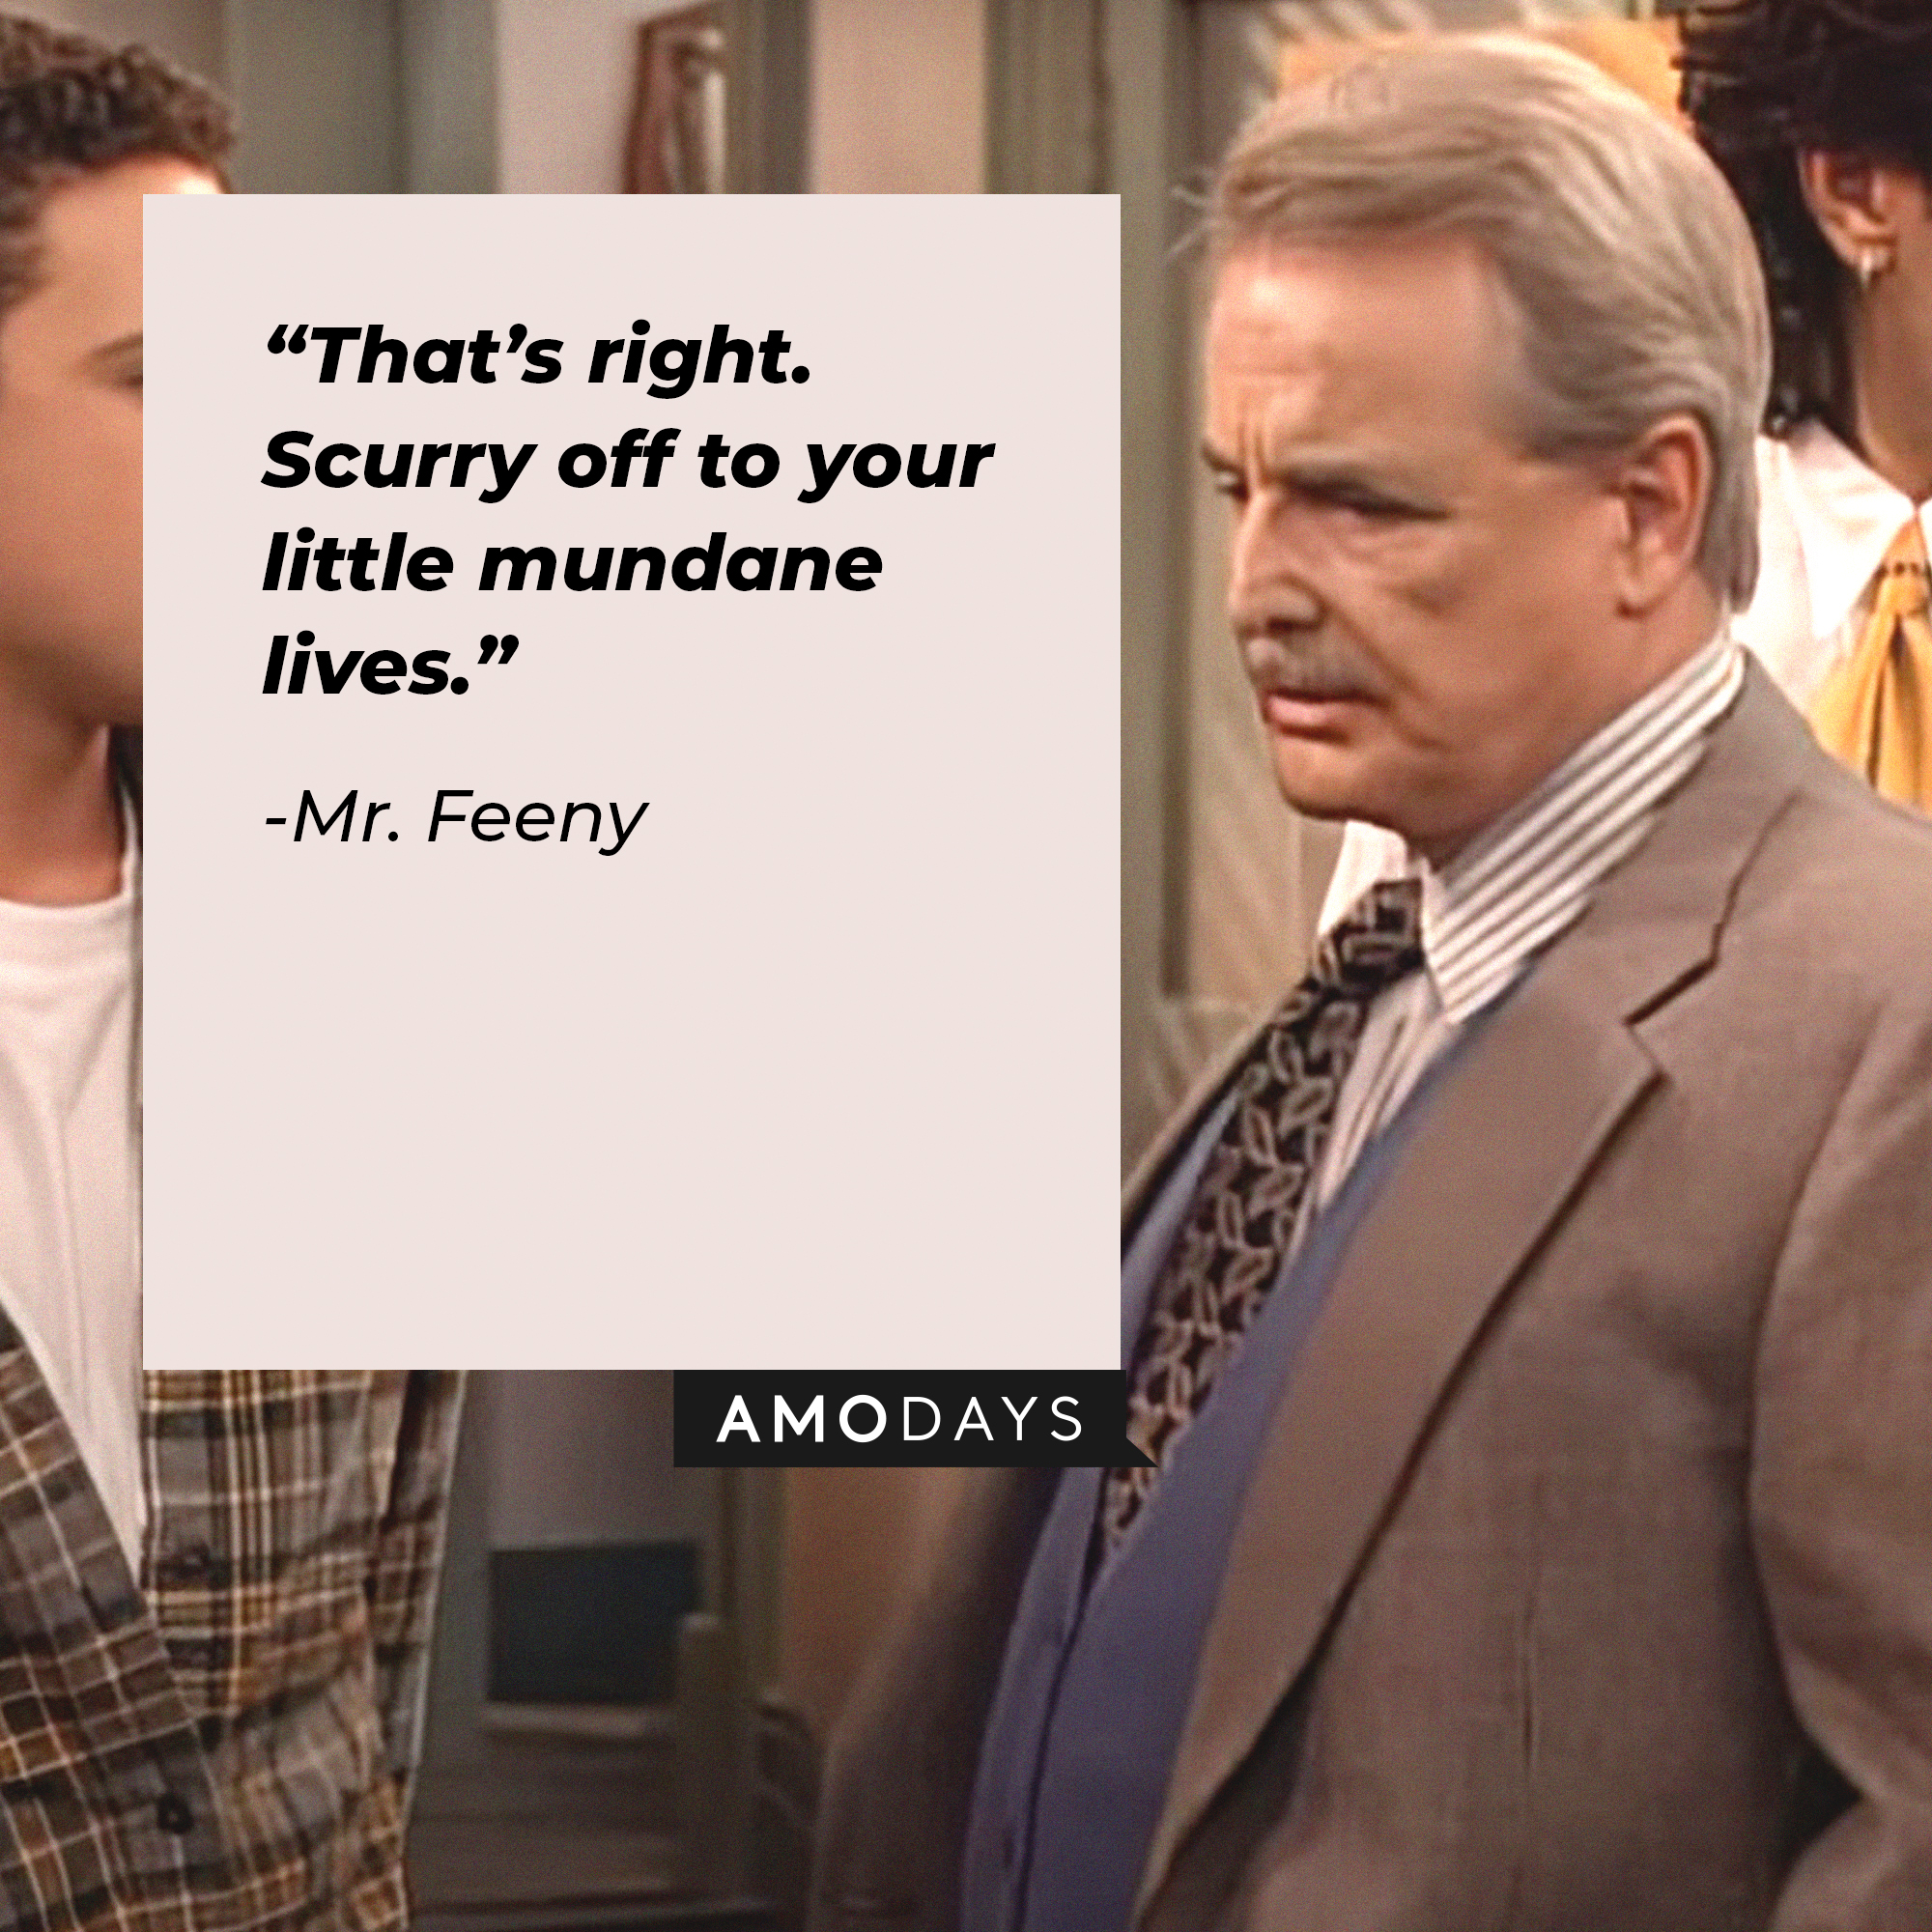 An image of Mr. Feeny with his quote: “That’s right. Scurry off to your little mundane lives.” | Source: facebook.com/BoyMeetsWorldSeries